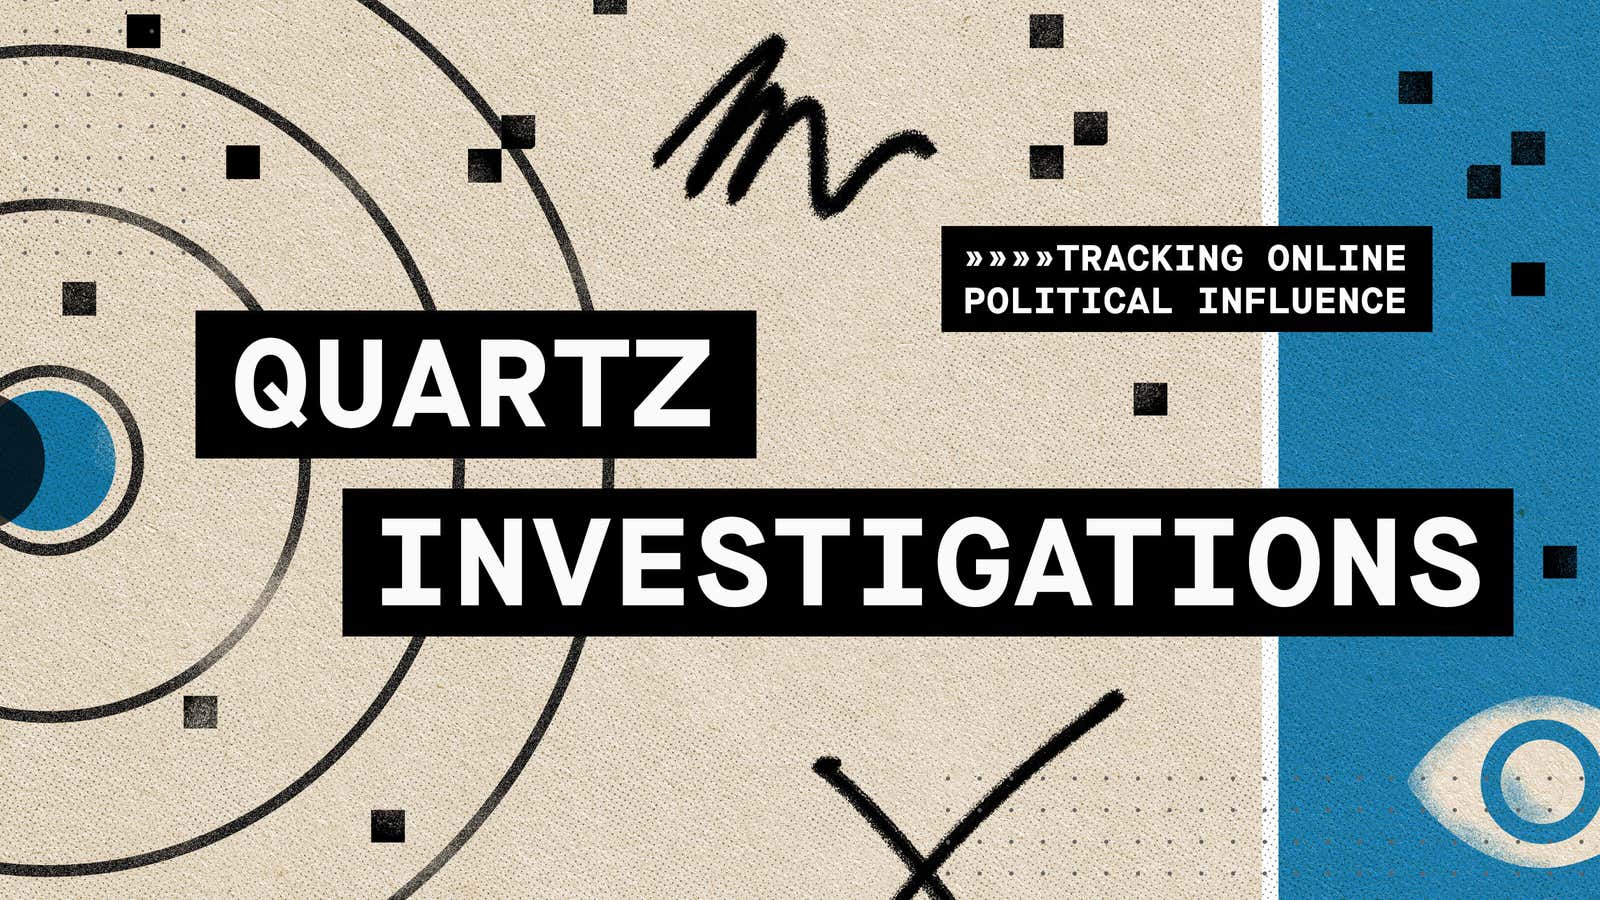 Quartz will use audience and AI to investigate online political influence